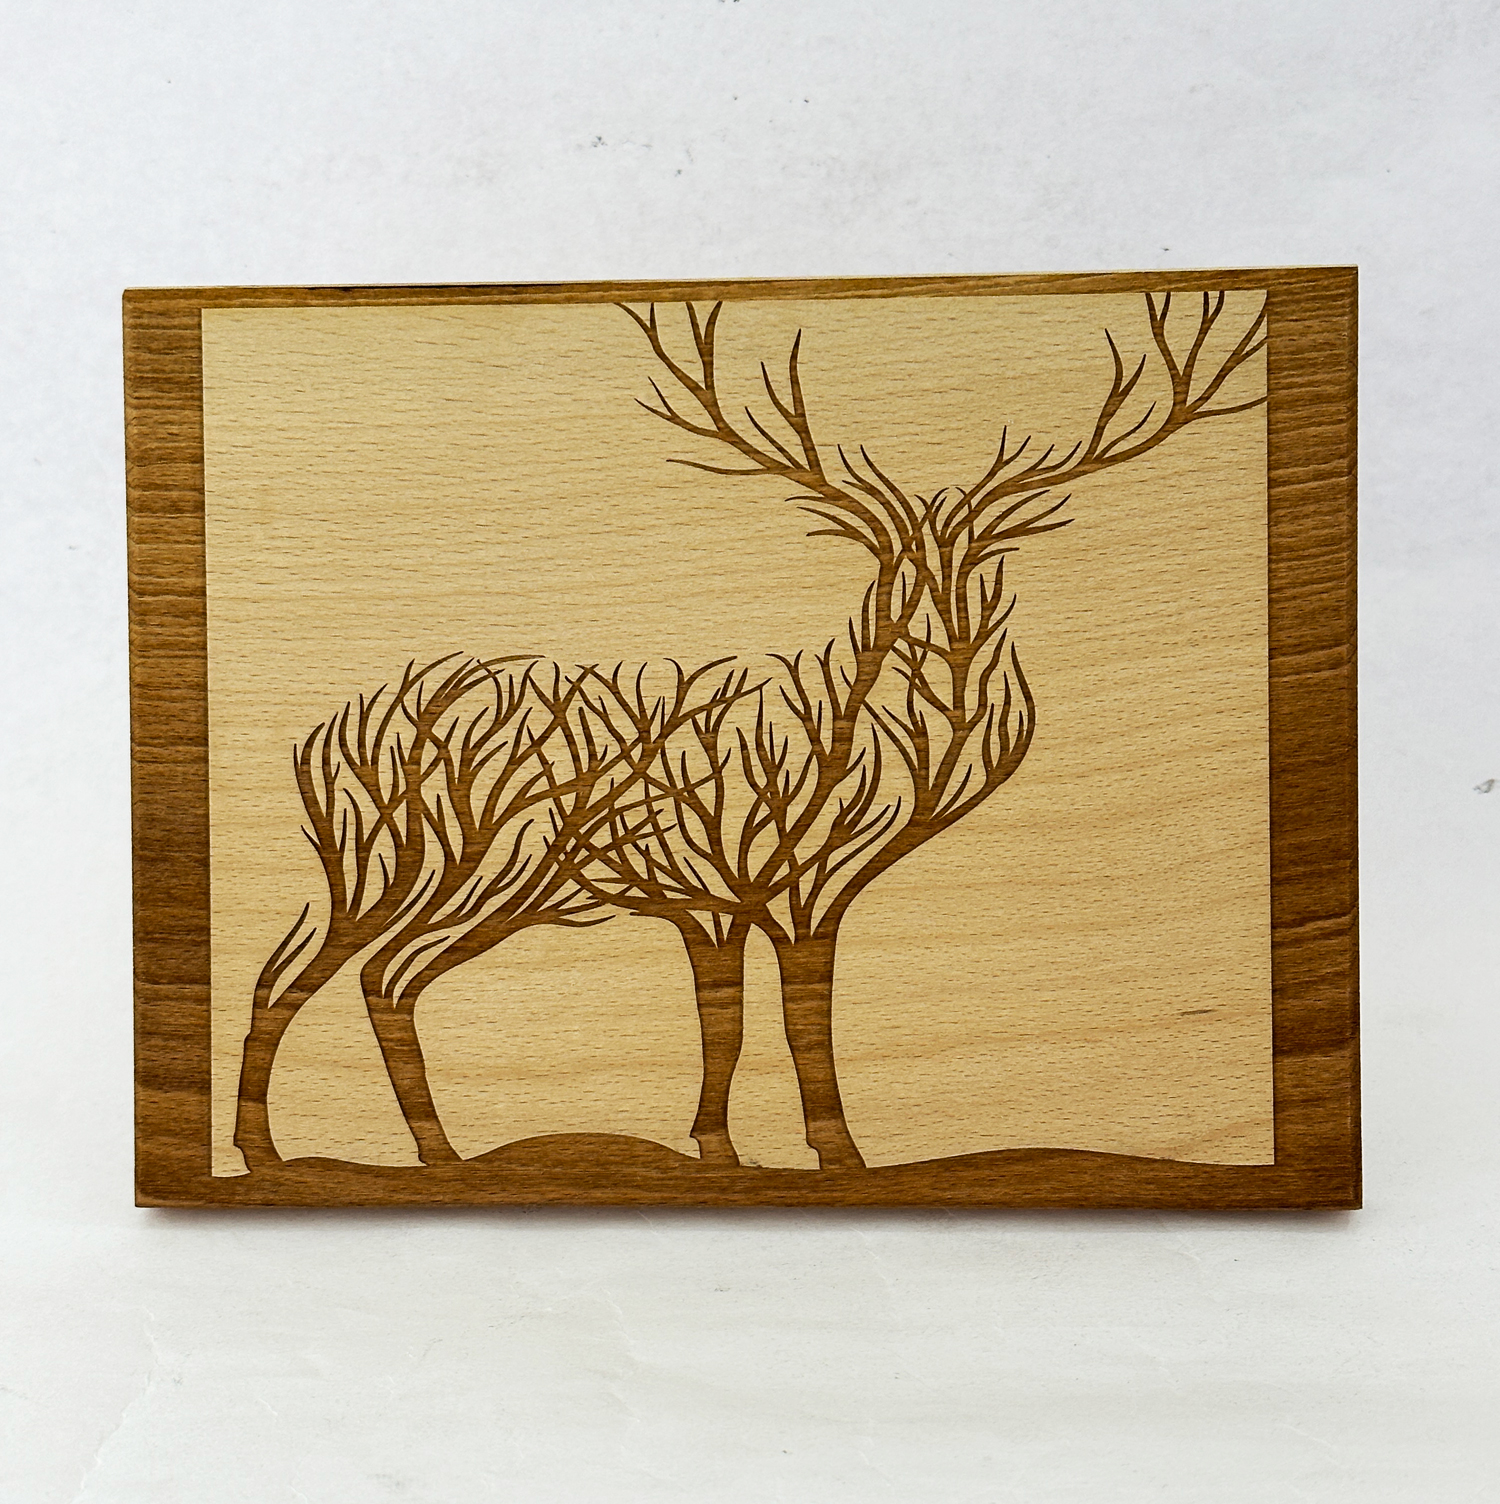 Carved Embossed Wood Plaque of Deer Cut Out | 8×6  Inch